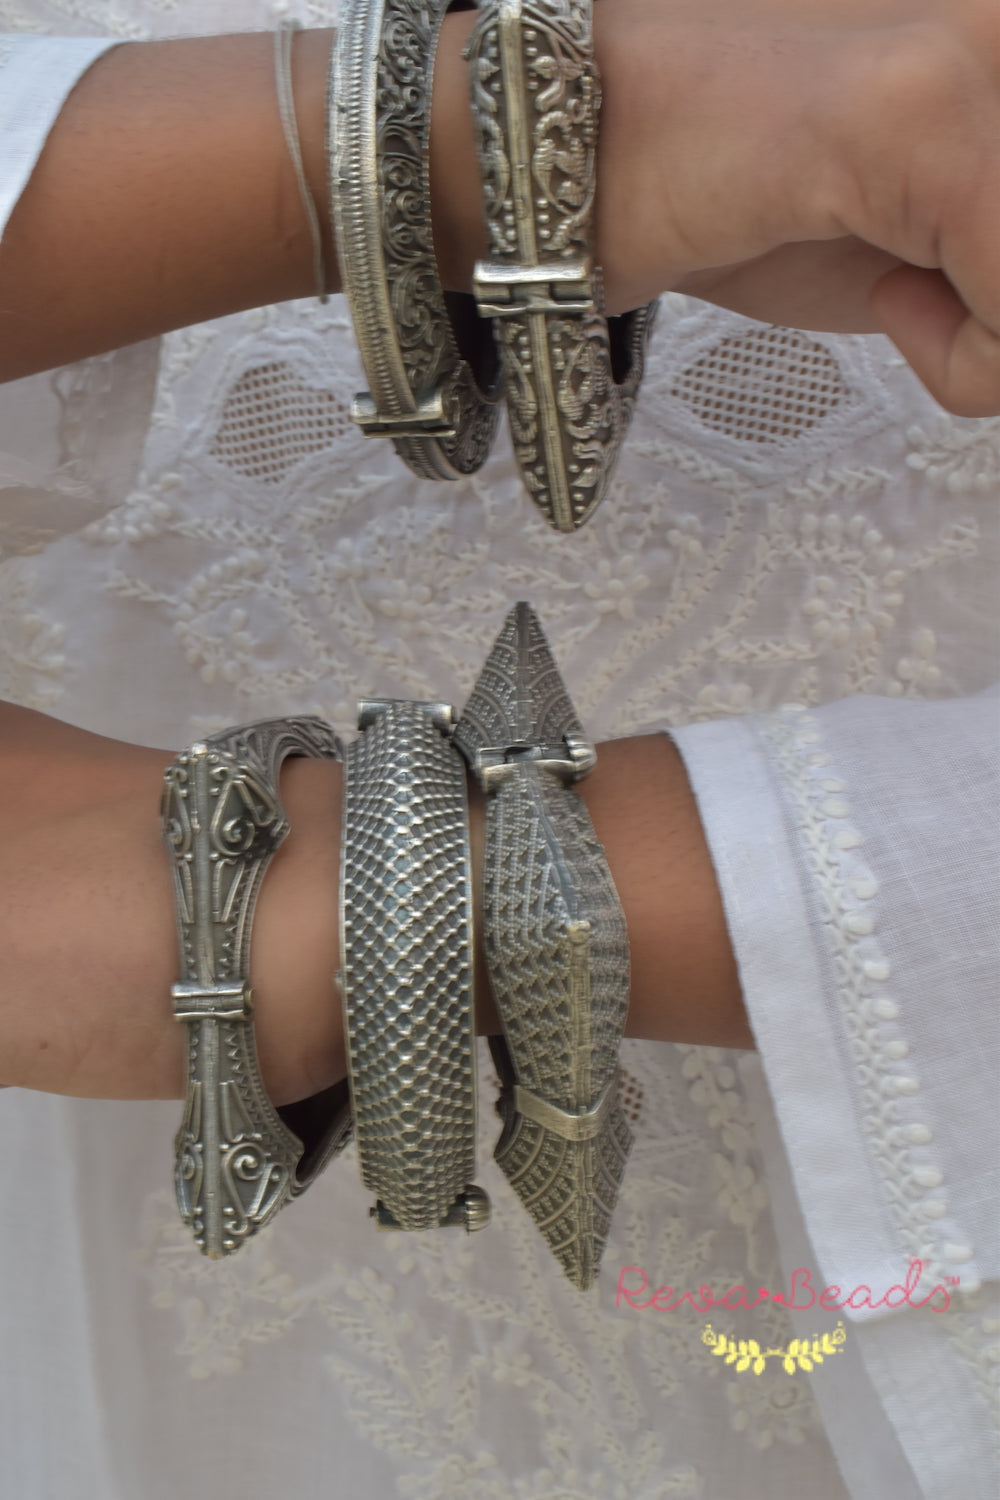 Senegalese Tribal Print Bangle Bracelets – The Africa within me